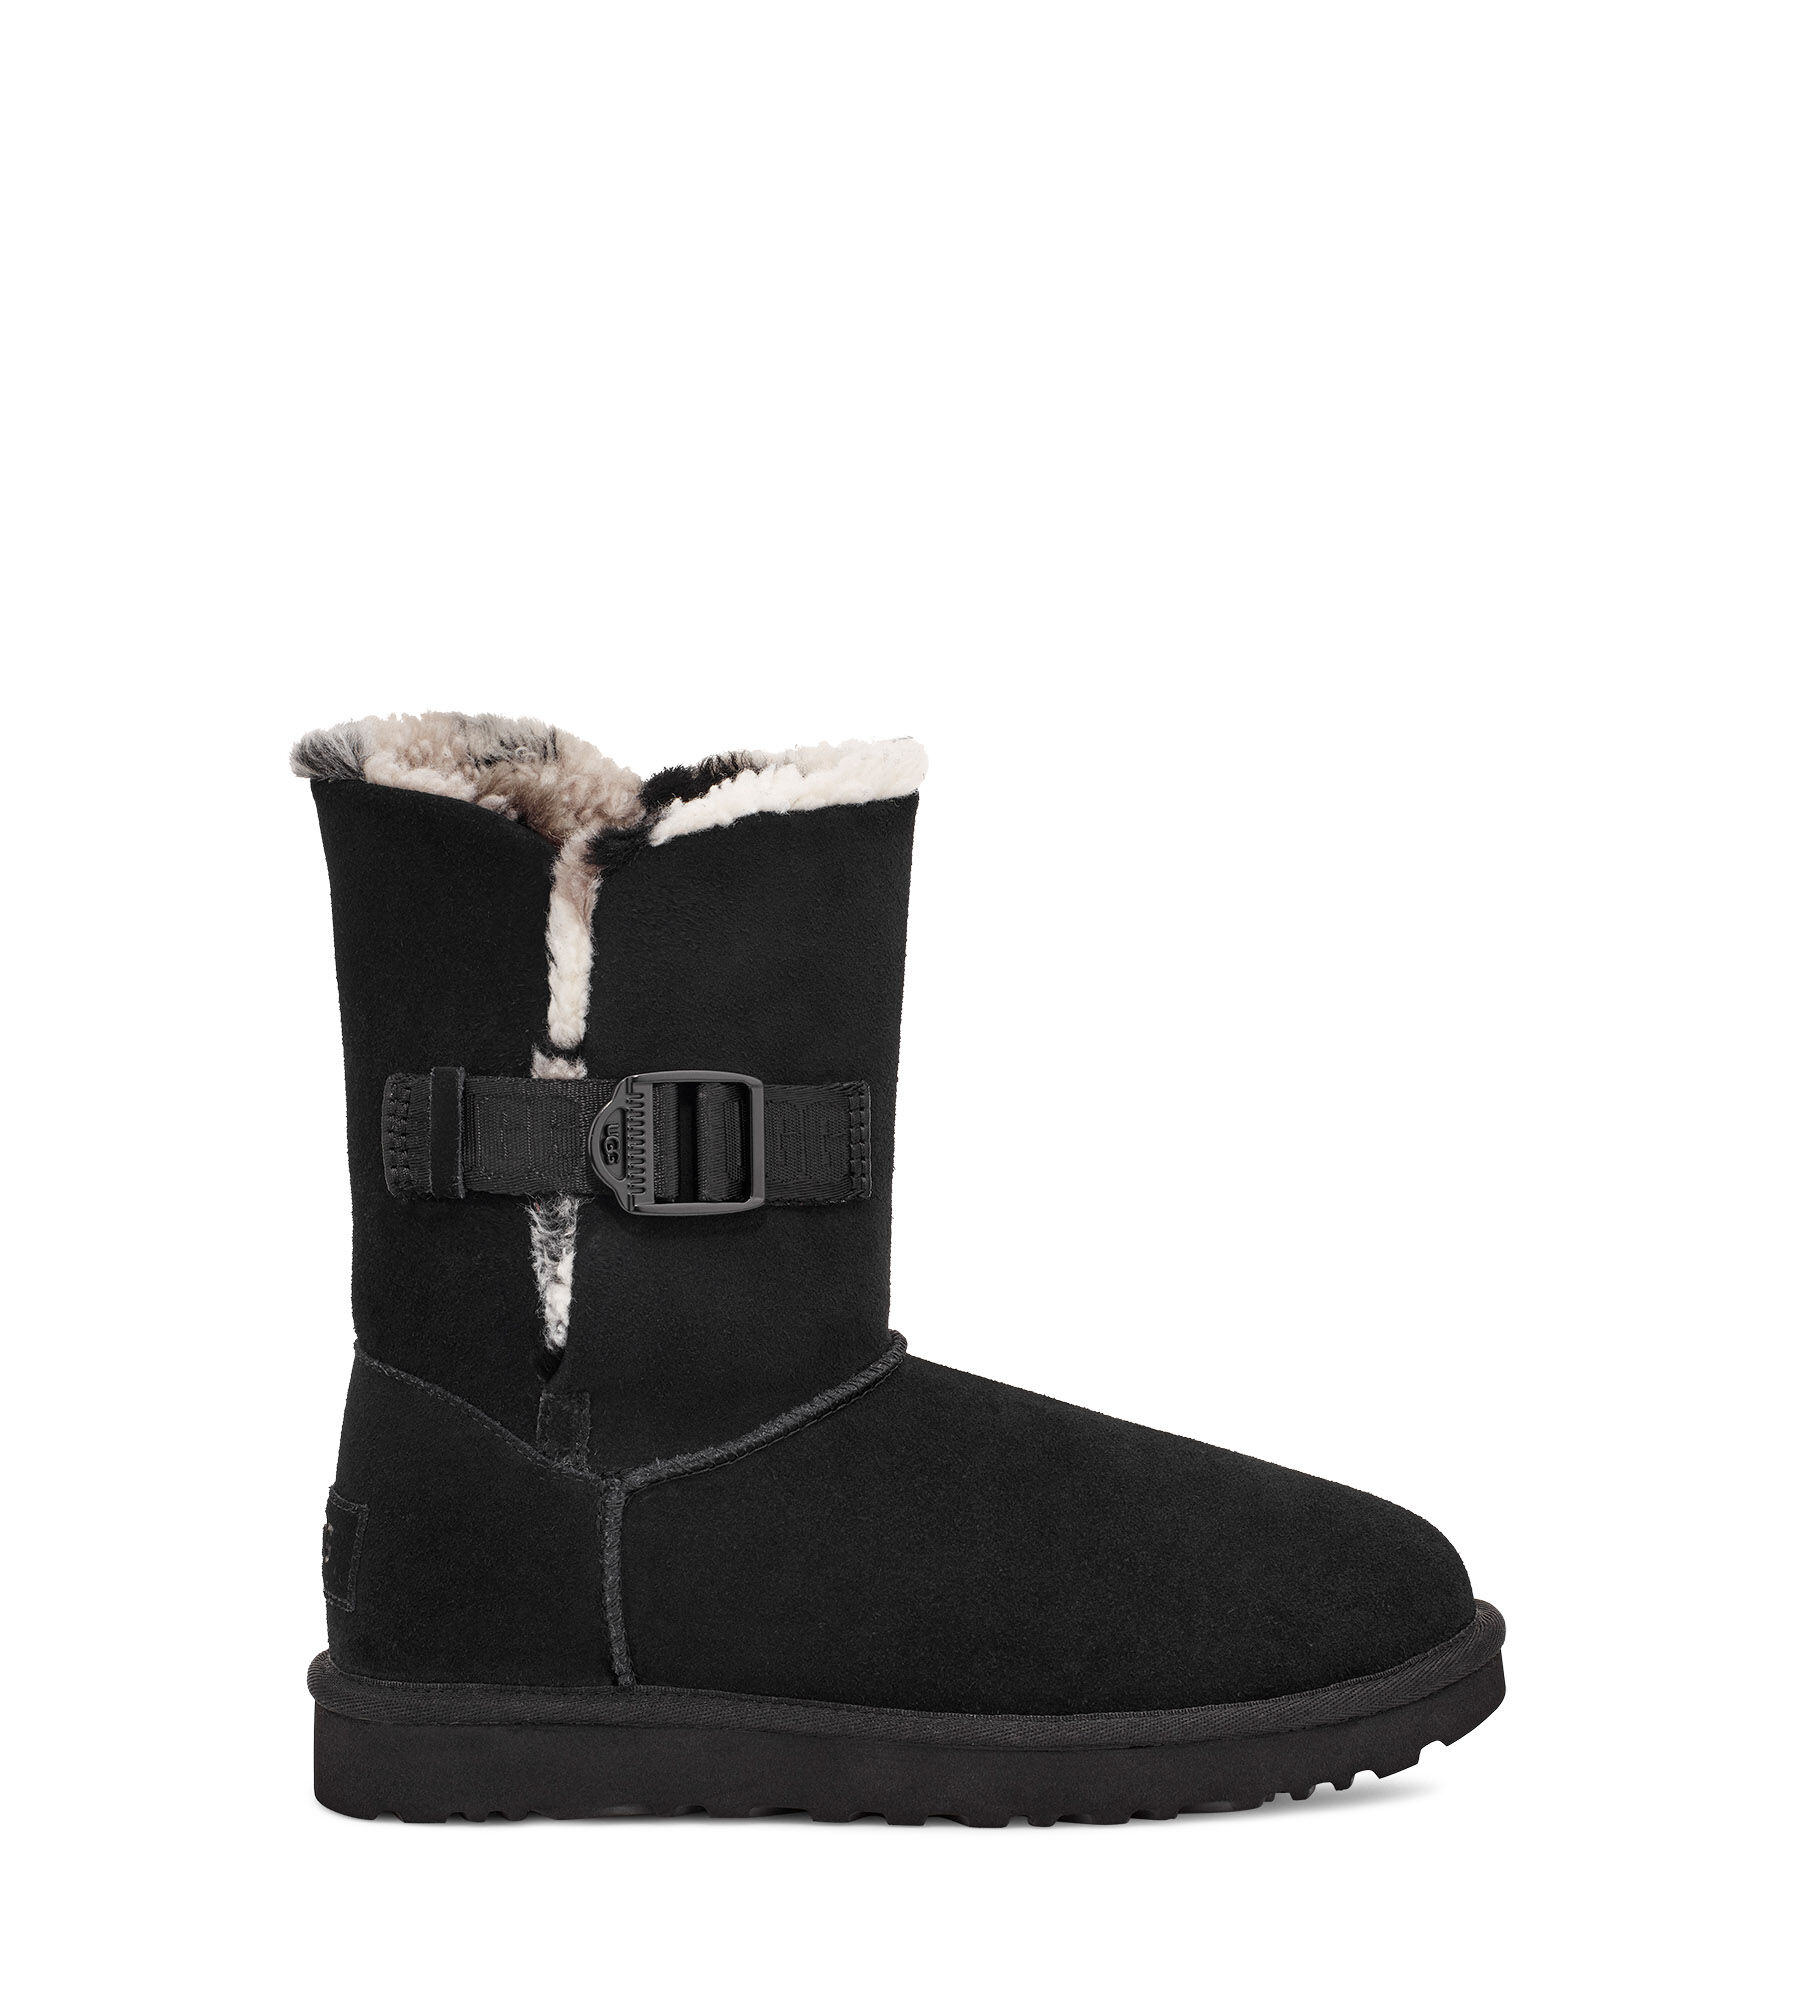 uggs size 8.5